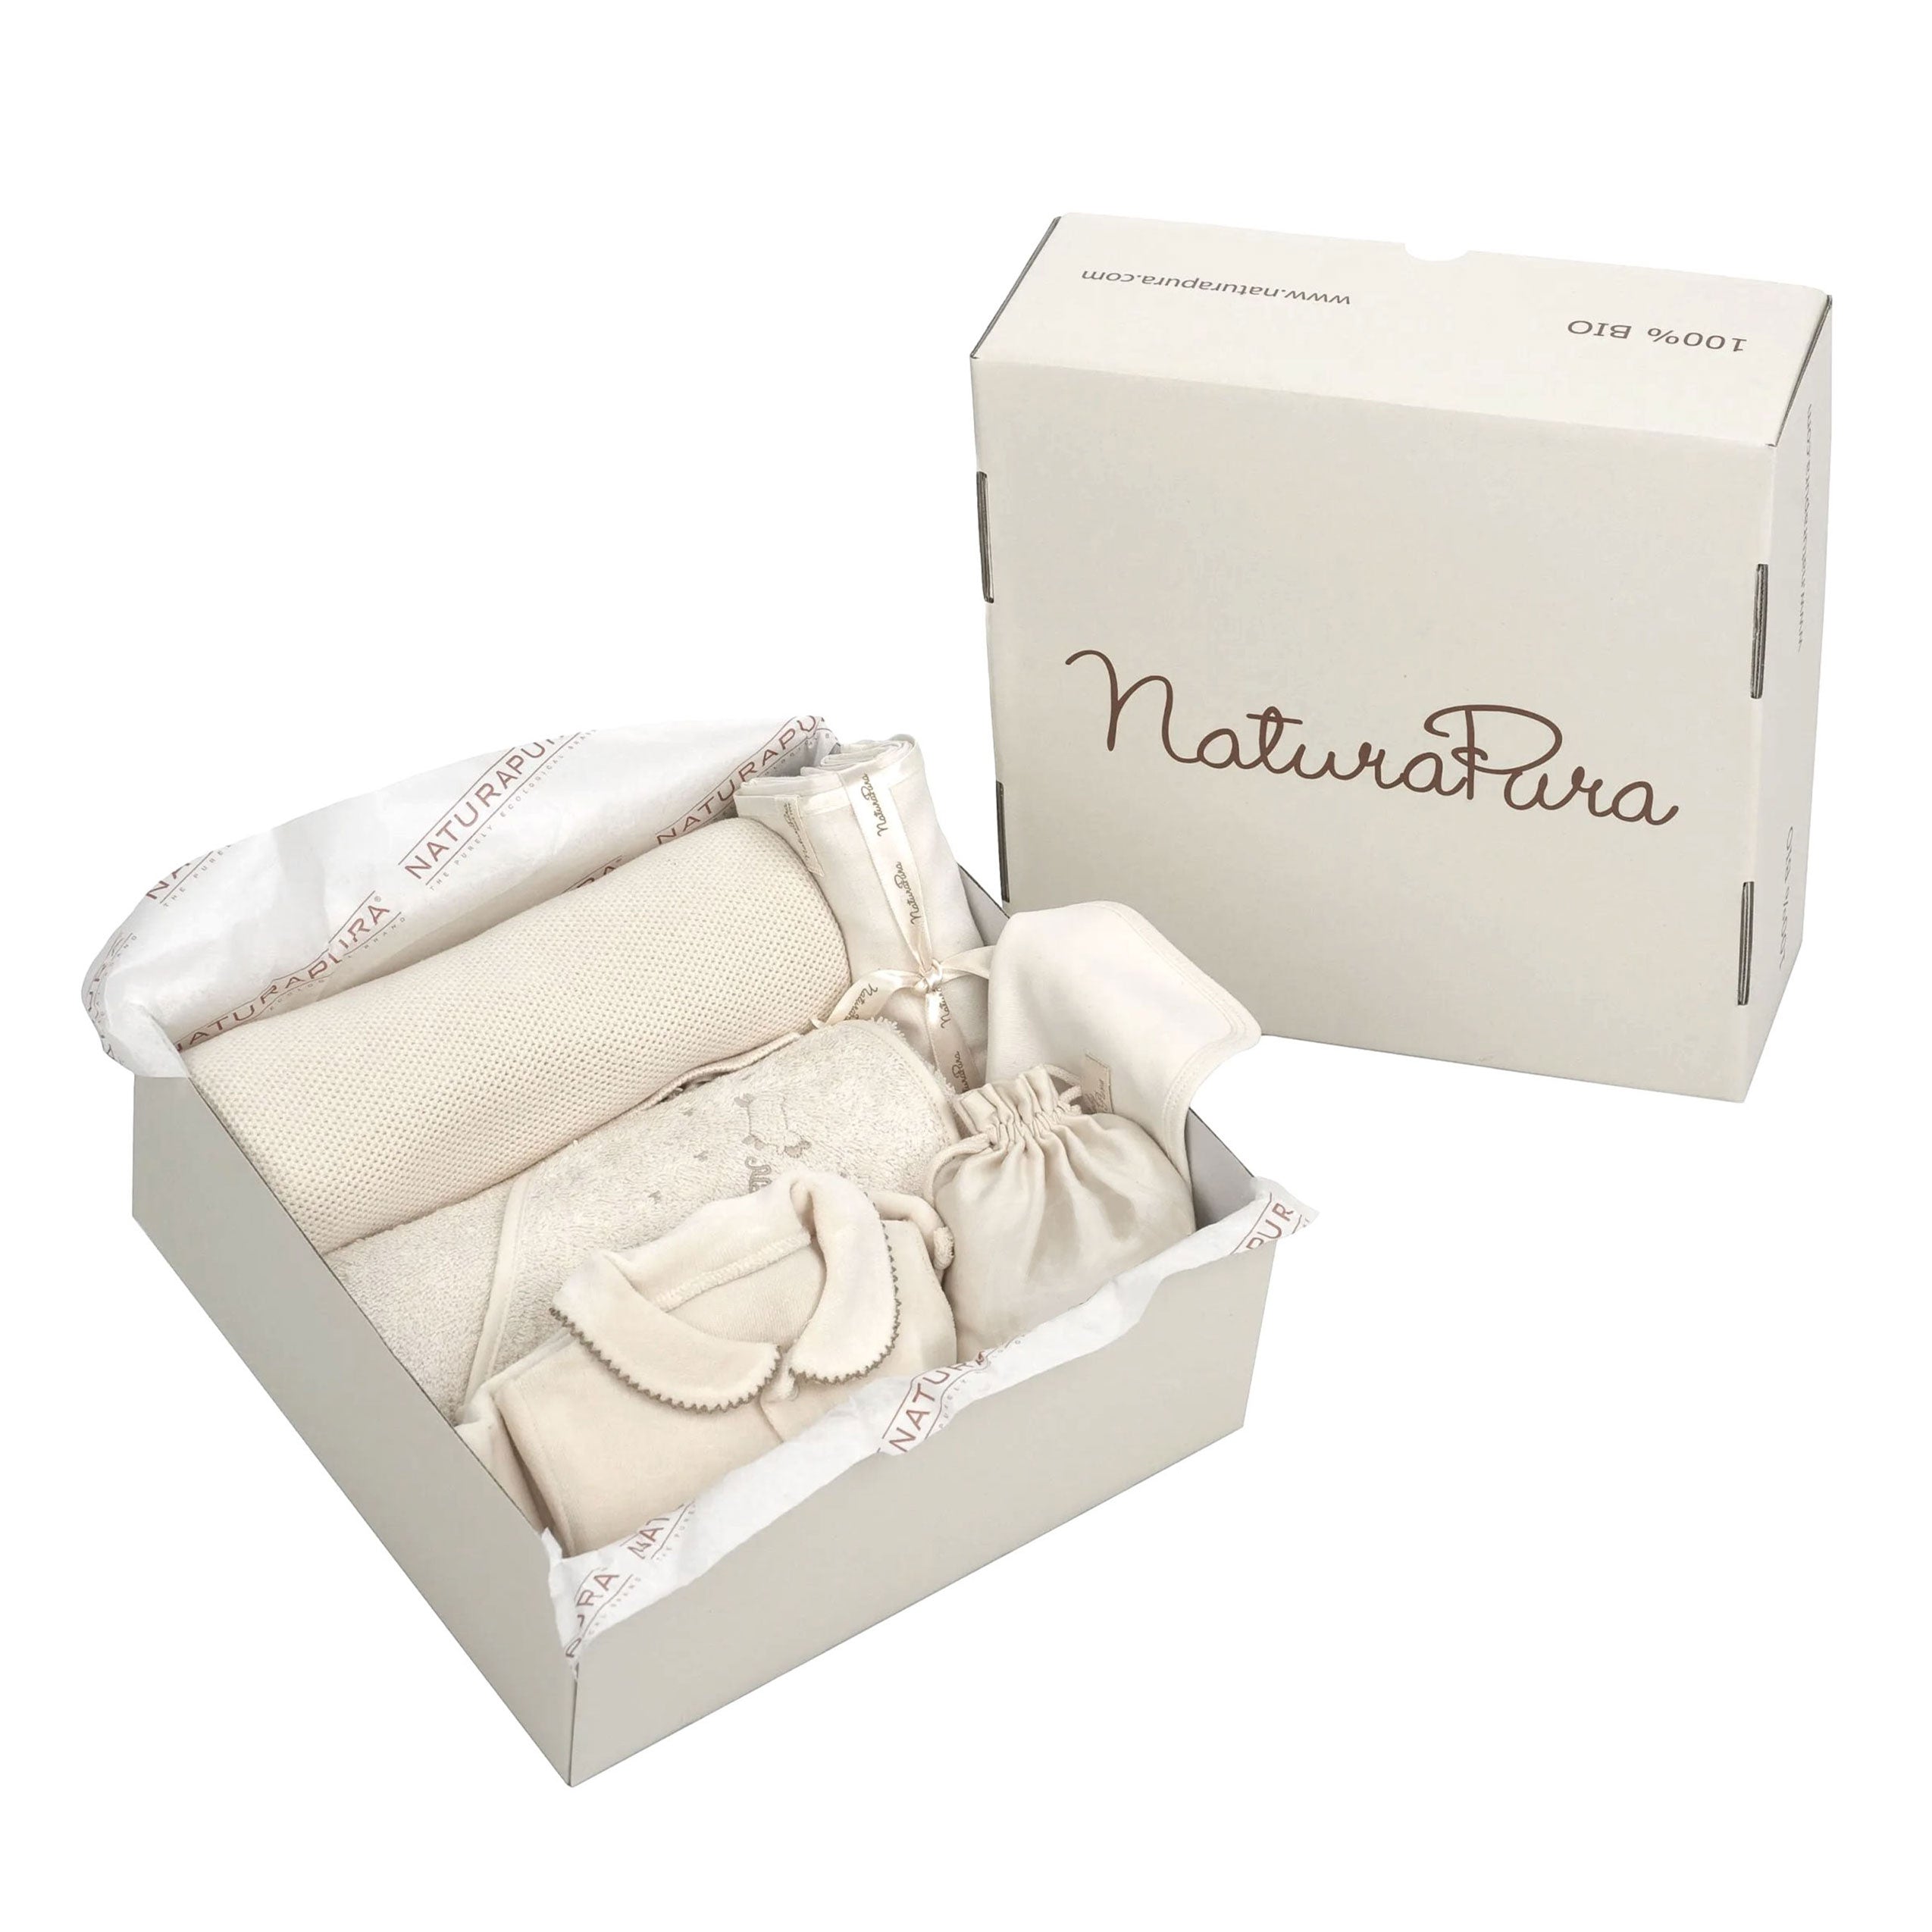 Luxury Welcome Home Baby Gift Pack with 11 pieces in organic cotton by Naturapura at Bonjour Baby Baskets